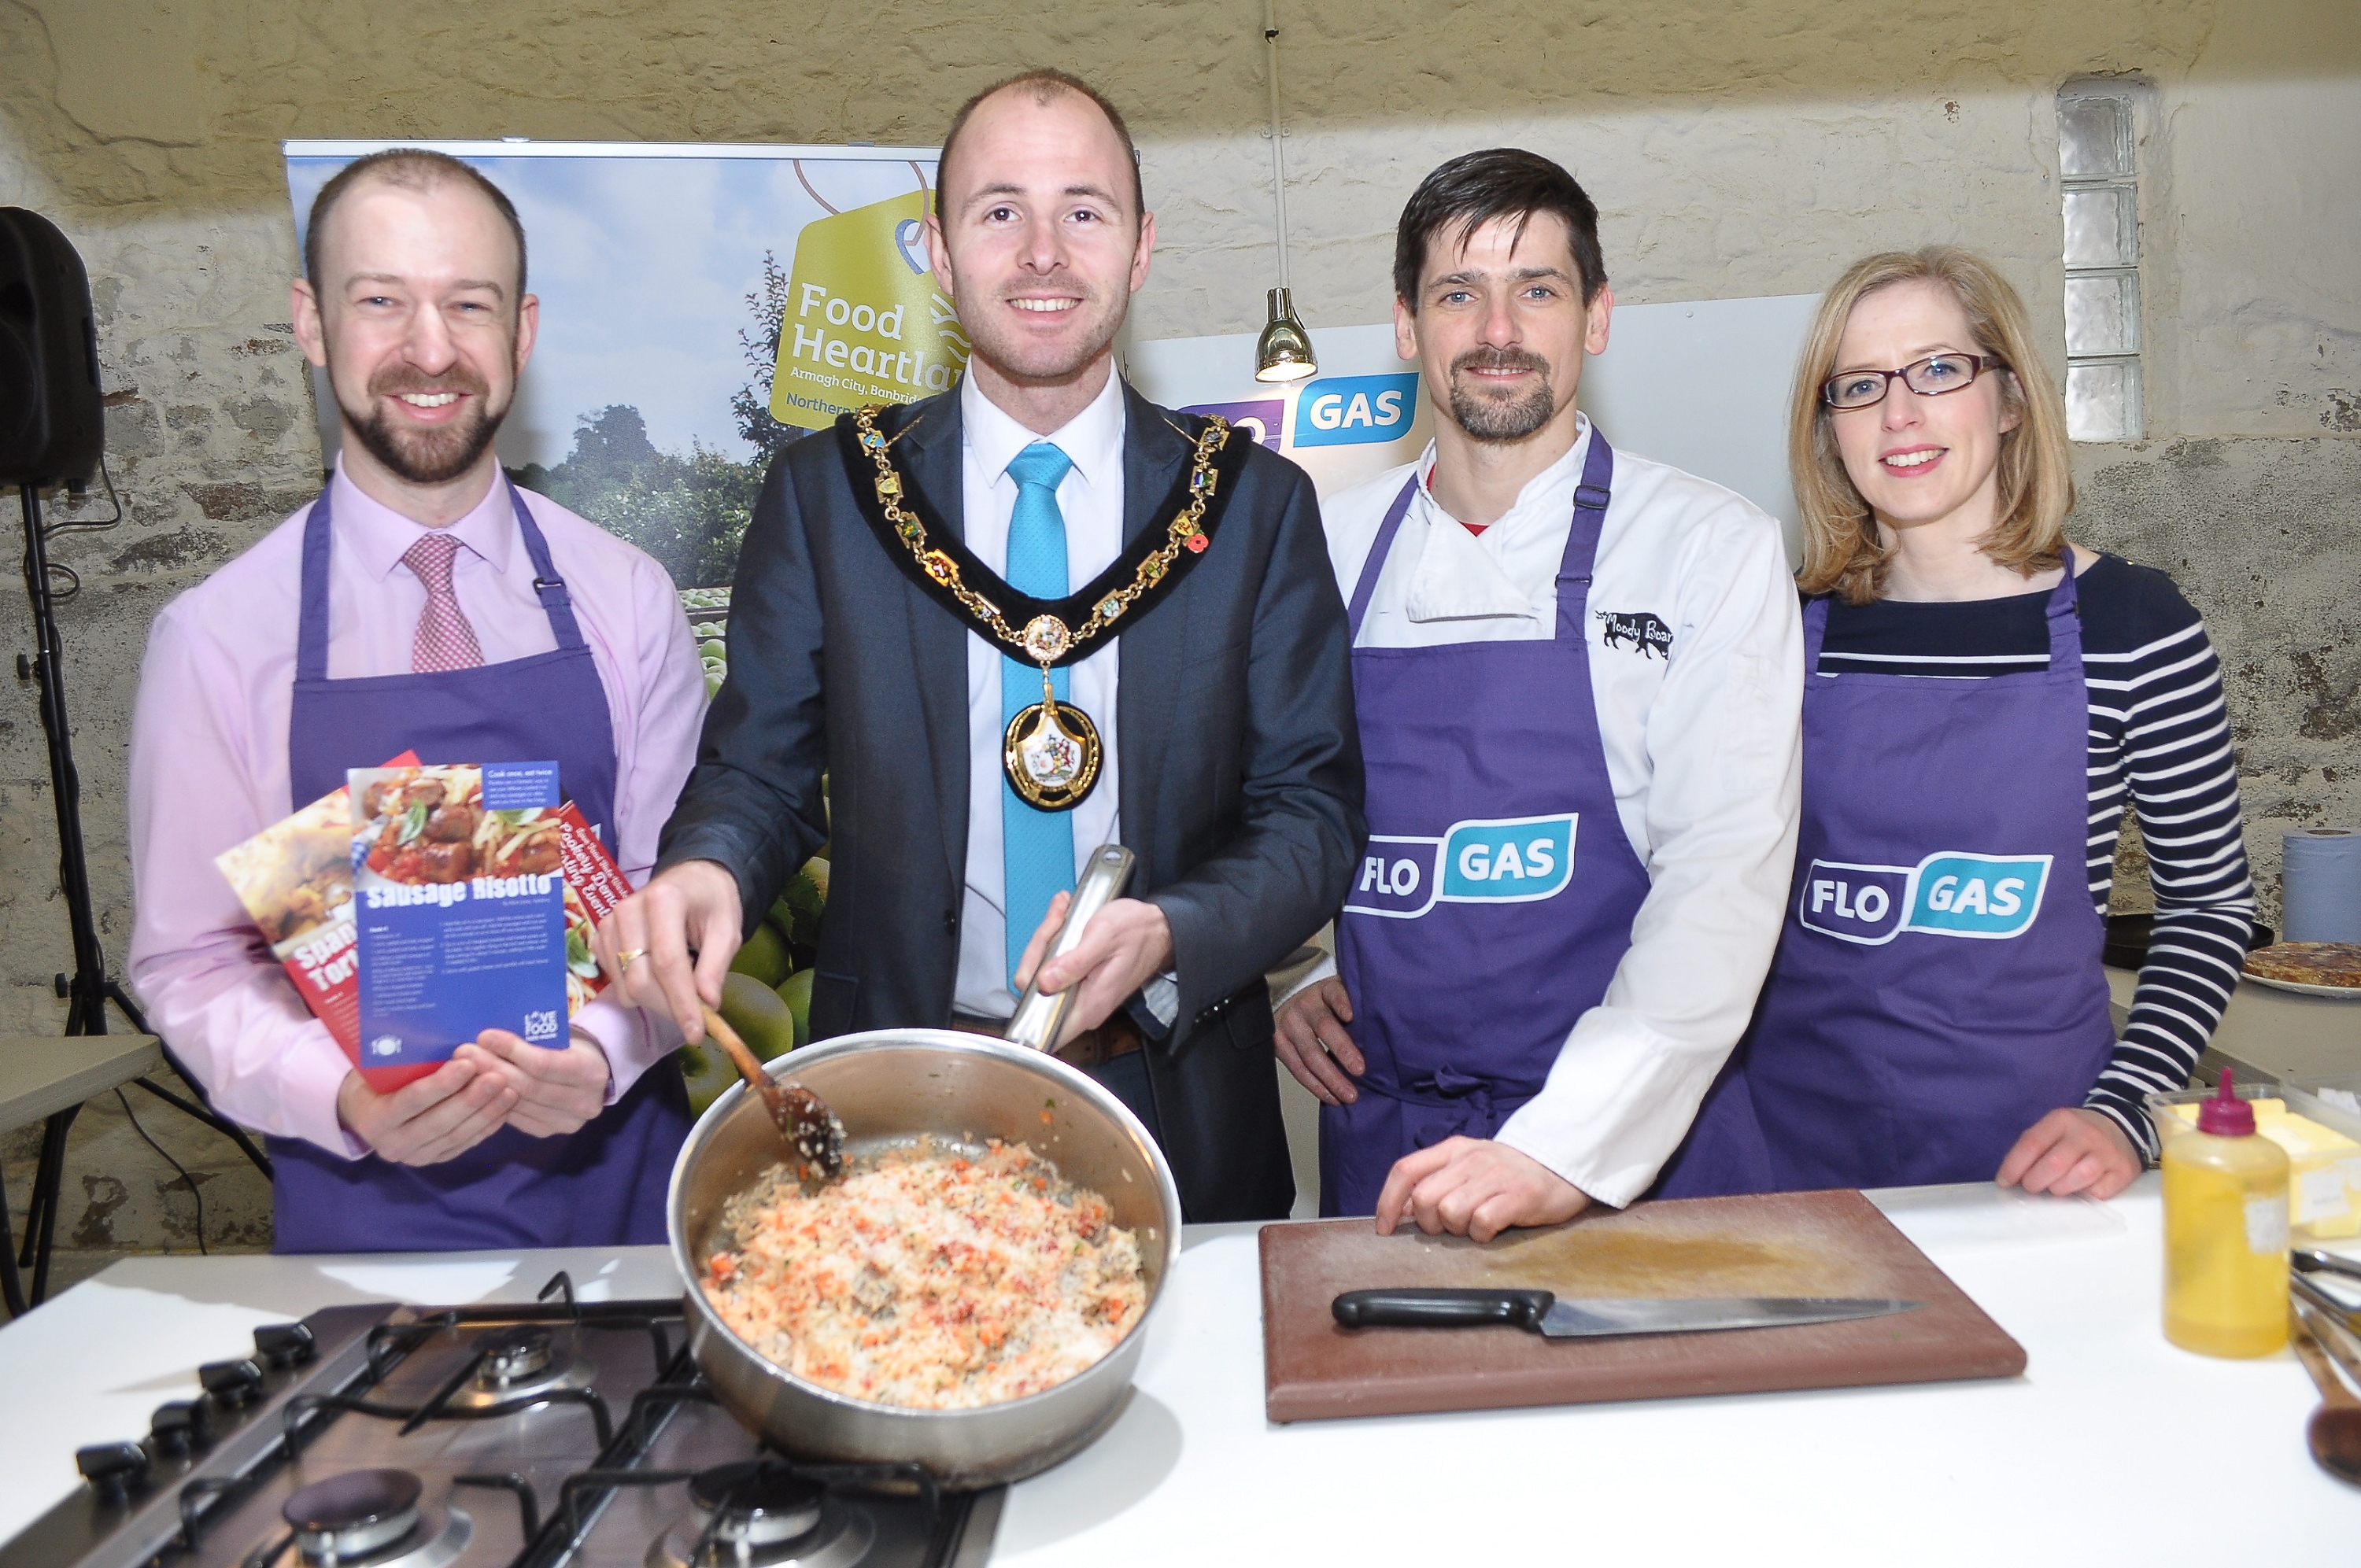 Lord Mayor of Armagh, Banbridge and Craigavon Councillor Darryn Causby with chef Sean Farnan, Paul Ruegg from Flogas and Jolene McColgan Development Officer (Markets & Open Spaces) – CREDIT: LiamMcArdle.com